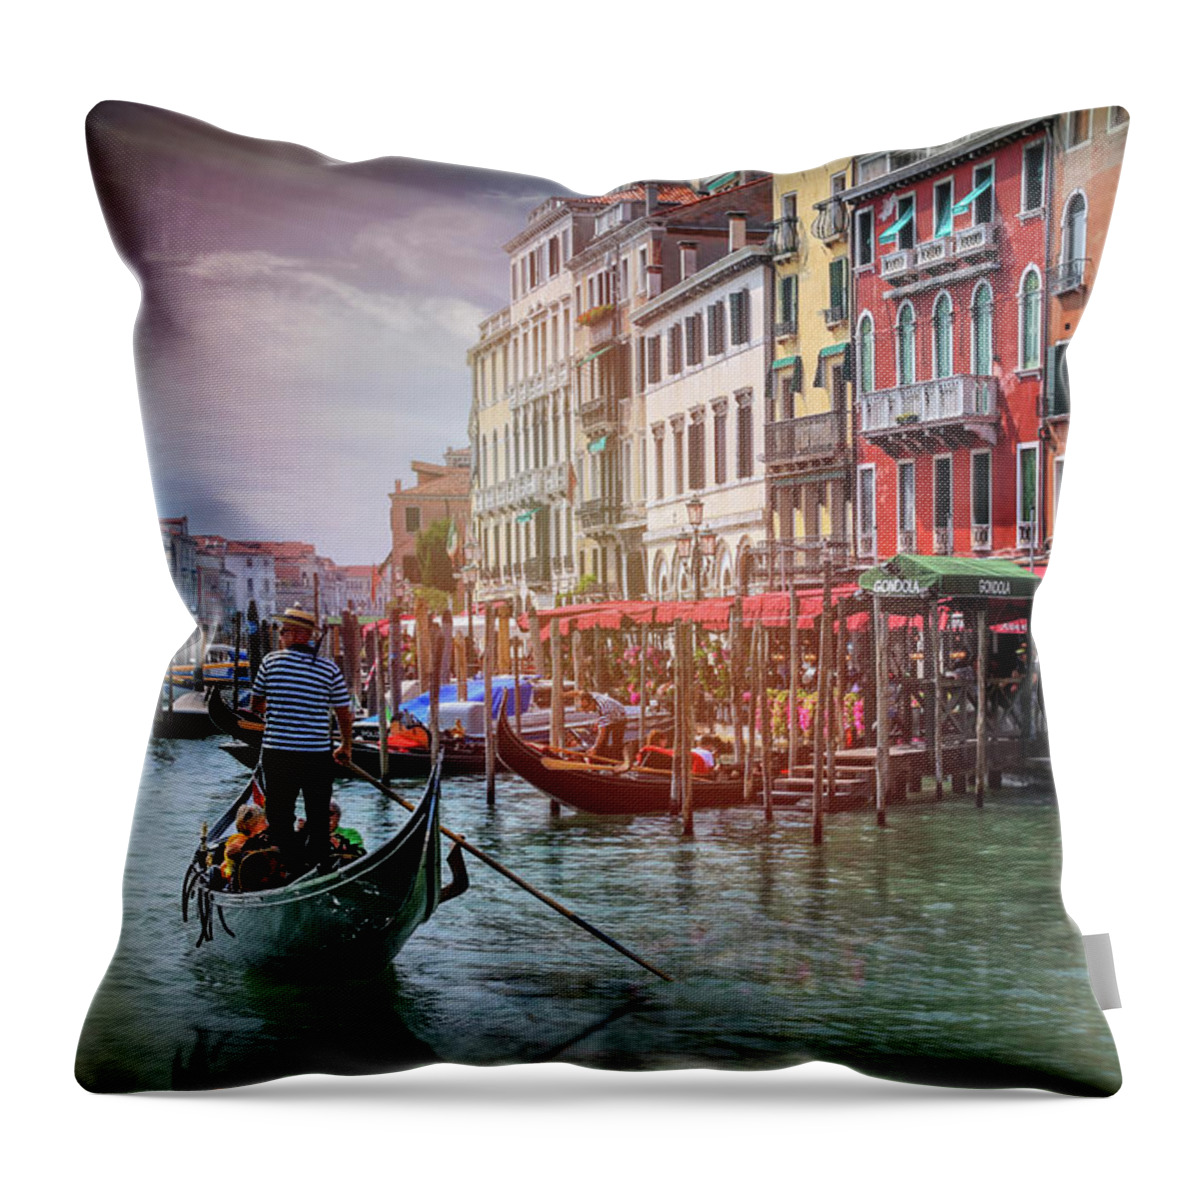 Venice Throw Pillow featuring the photograph Life on The Grand Canal Venice Italy by Carol Japp